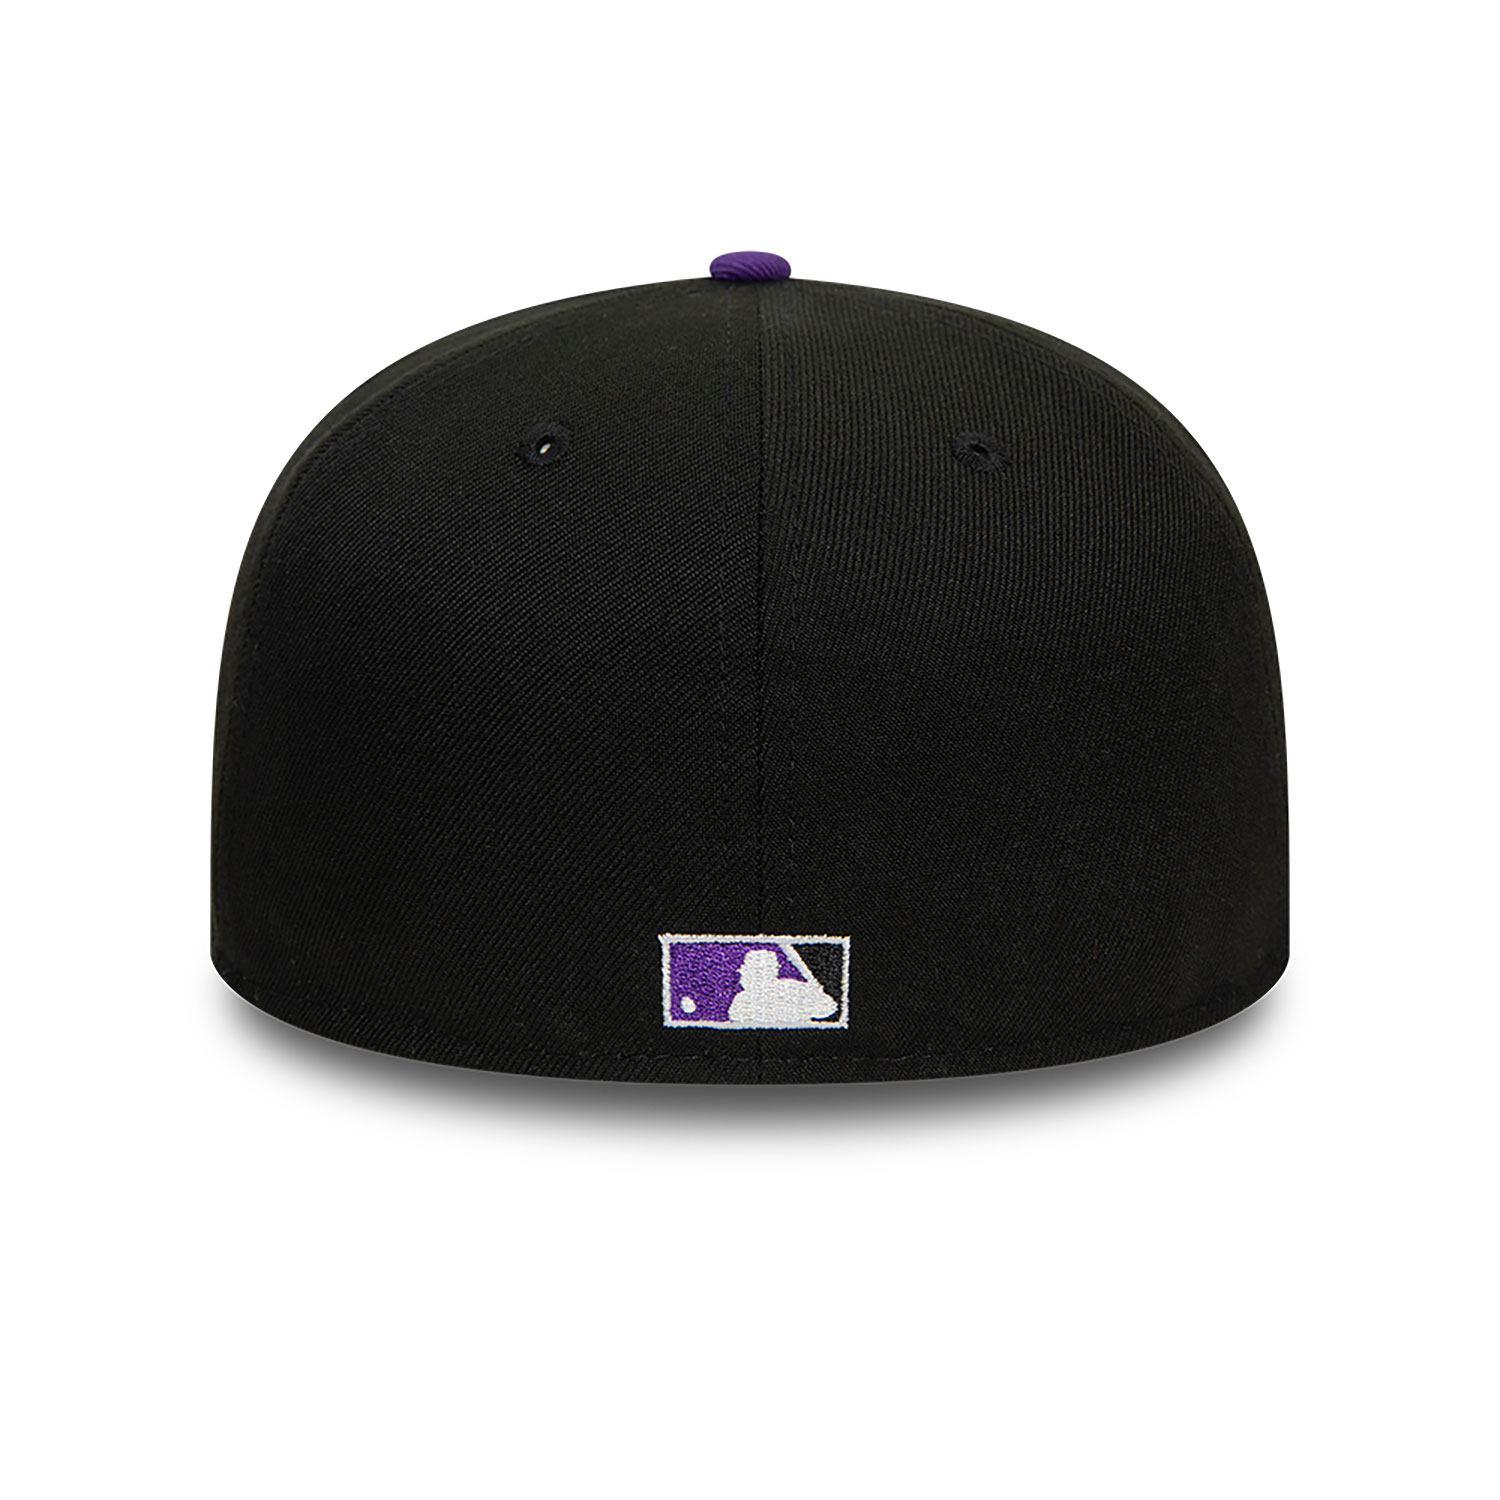 Oakland Athletics Upside Down Black 59FIFTY Fitted Cap